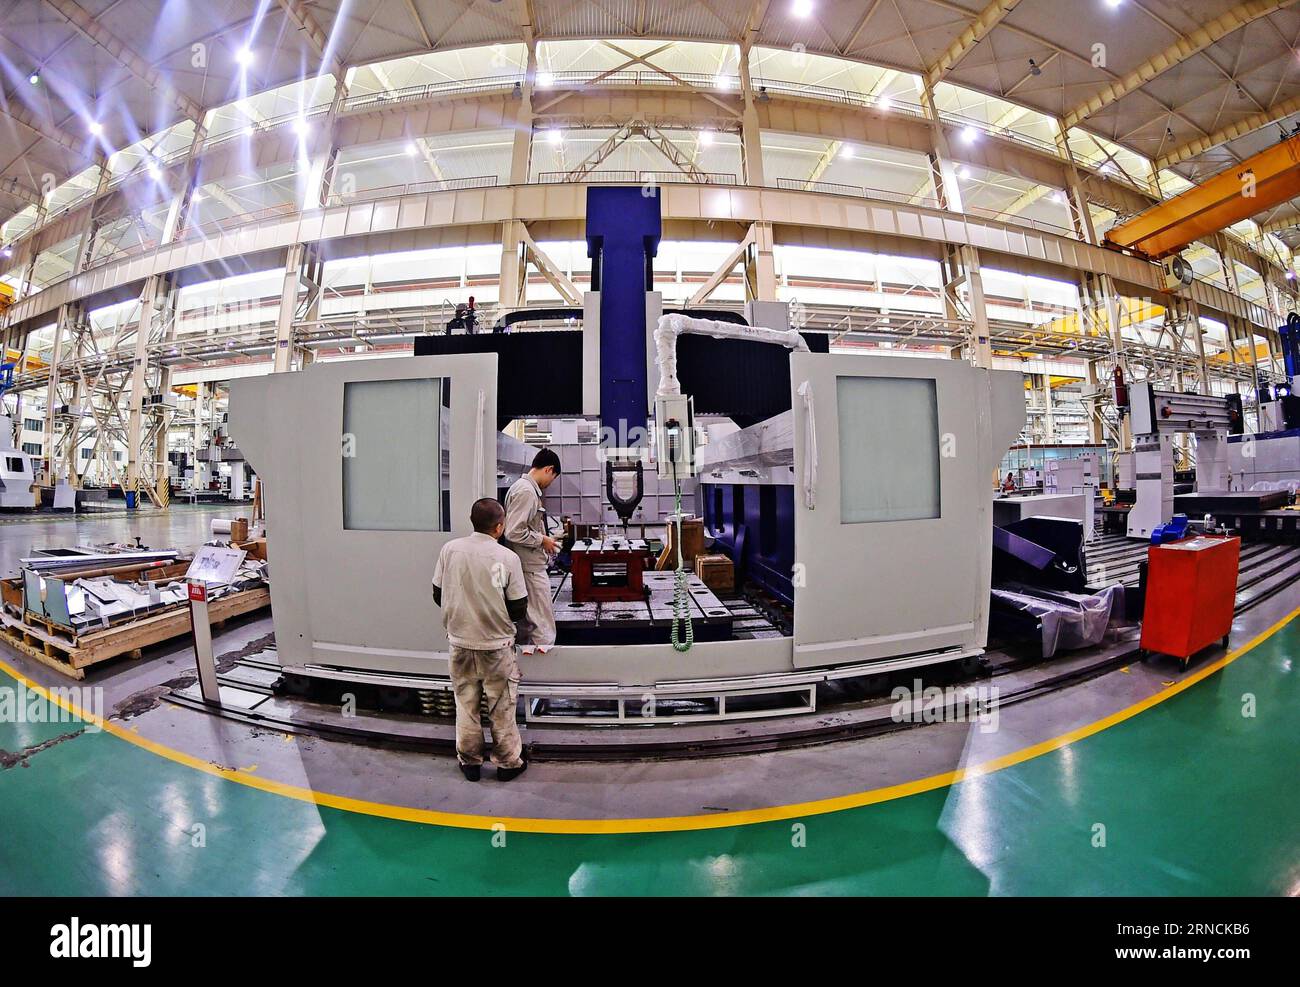 (160415) -- SHENYANG, April 15, 2016 -- People work at a factory of Shenyang Machine Tool Co., Ltd. March 28, 2016 in Shenyang, capital of northeast China s Liaoning Province. China s GDP stood at 15.9 trillion RMB yuan (2.4 trillion U.S. dollars) in the first quarter this year, growing up by 6.7 percent year on year, the National Bureau of Statistics said on April 15, 2016. ) (zwx) CHINA-GDP-GROWTH RATE (CN) YangxQing PUBLICATIONxNOTxINxCHN   160415 Shenyang April 15 2016 Celebrities Work AT a Factory of Shenyang Machine Tool Co Ltd March 28 2016 in Shenyang Capital of Northeast China S Liaon Stock Photo